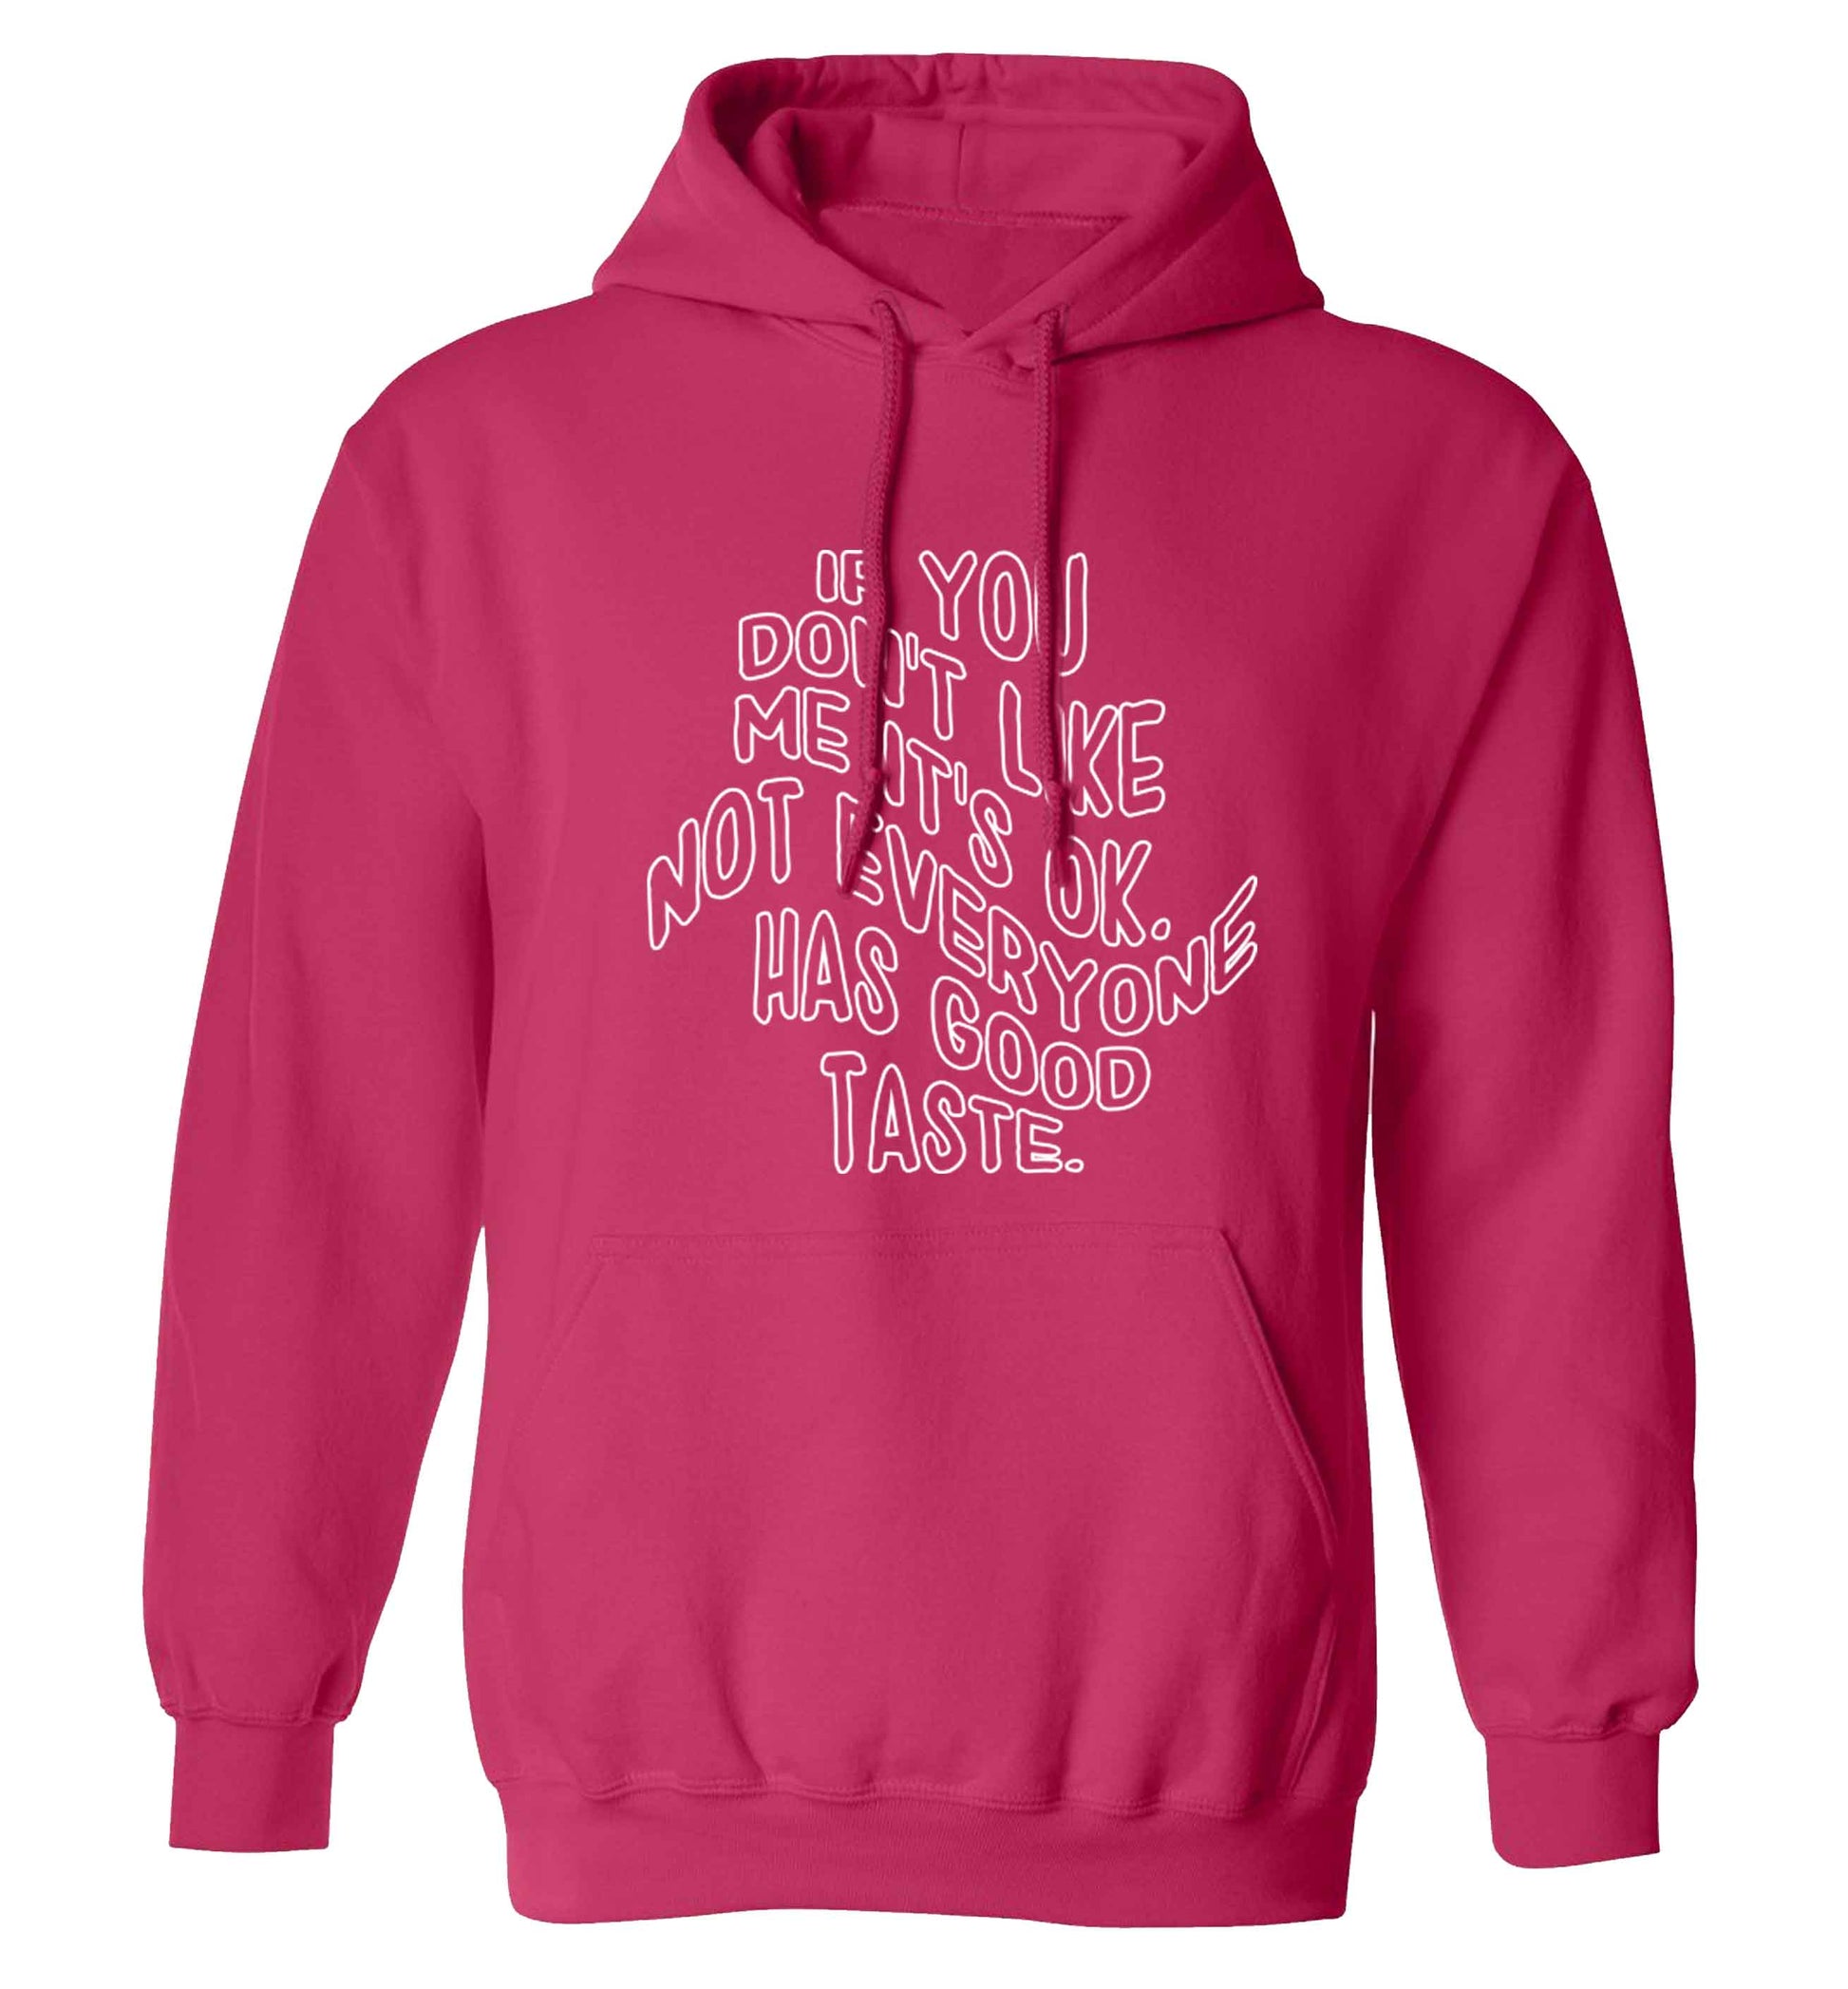 If you don't like me it's ok not everyone has good taste adults unisex pink hoodie 2XL